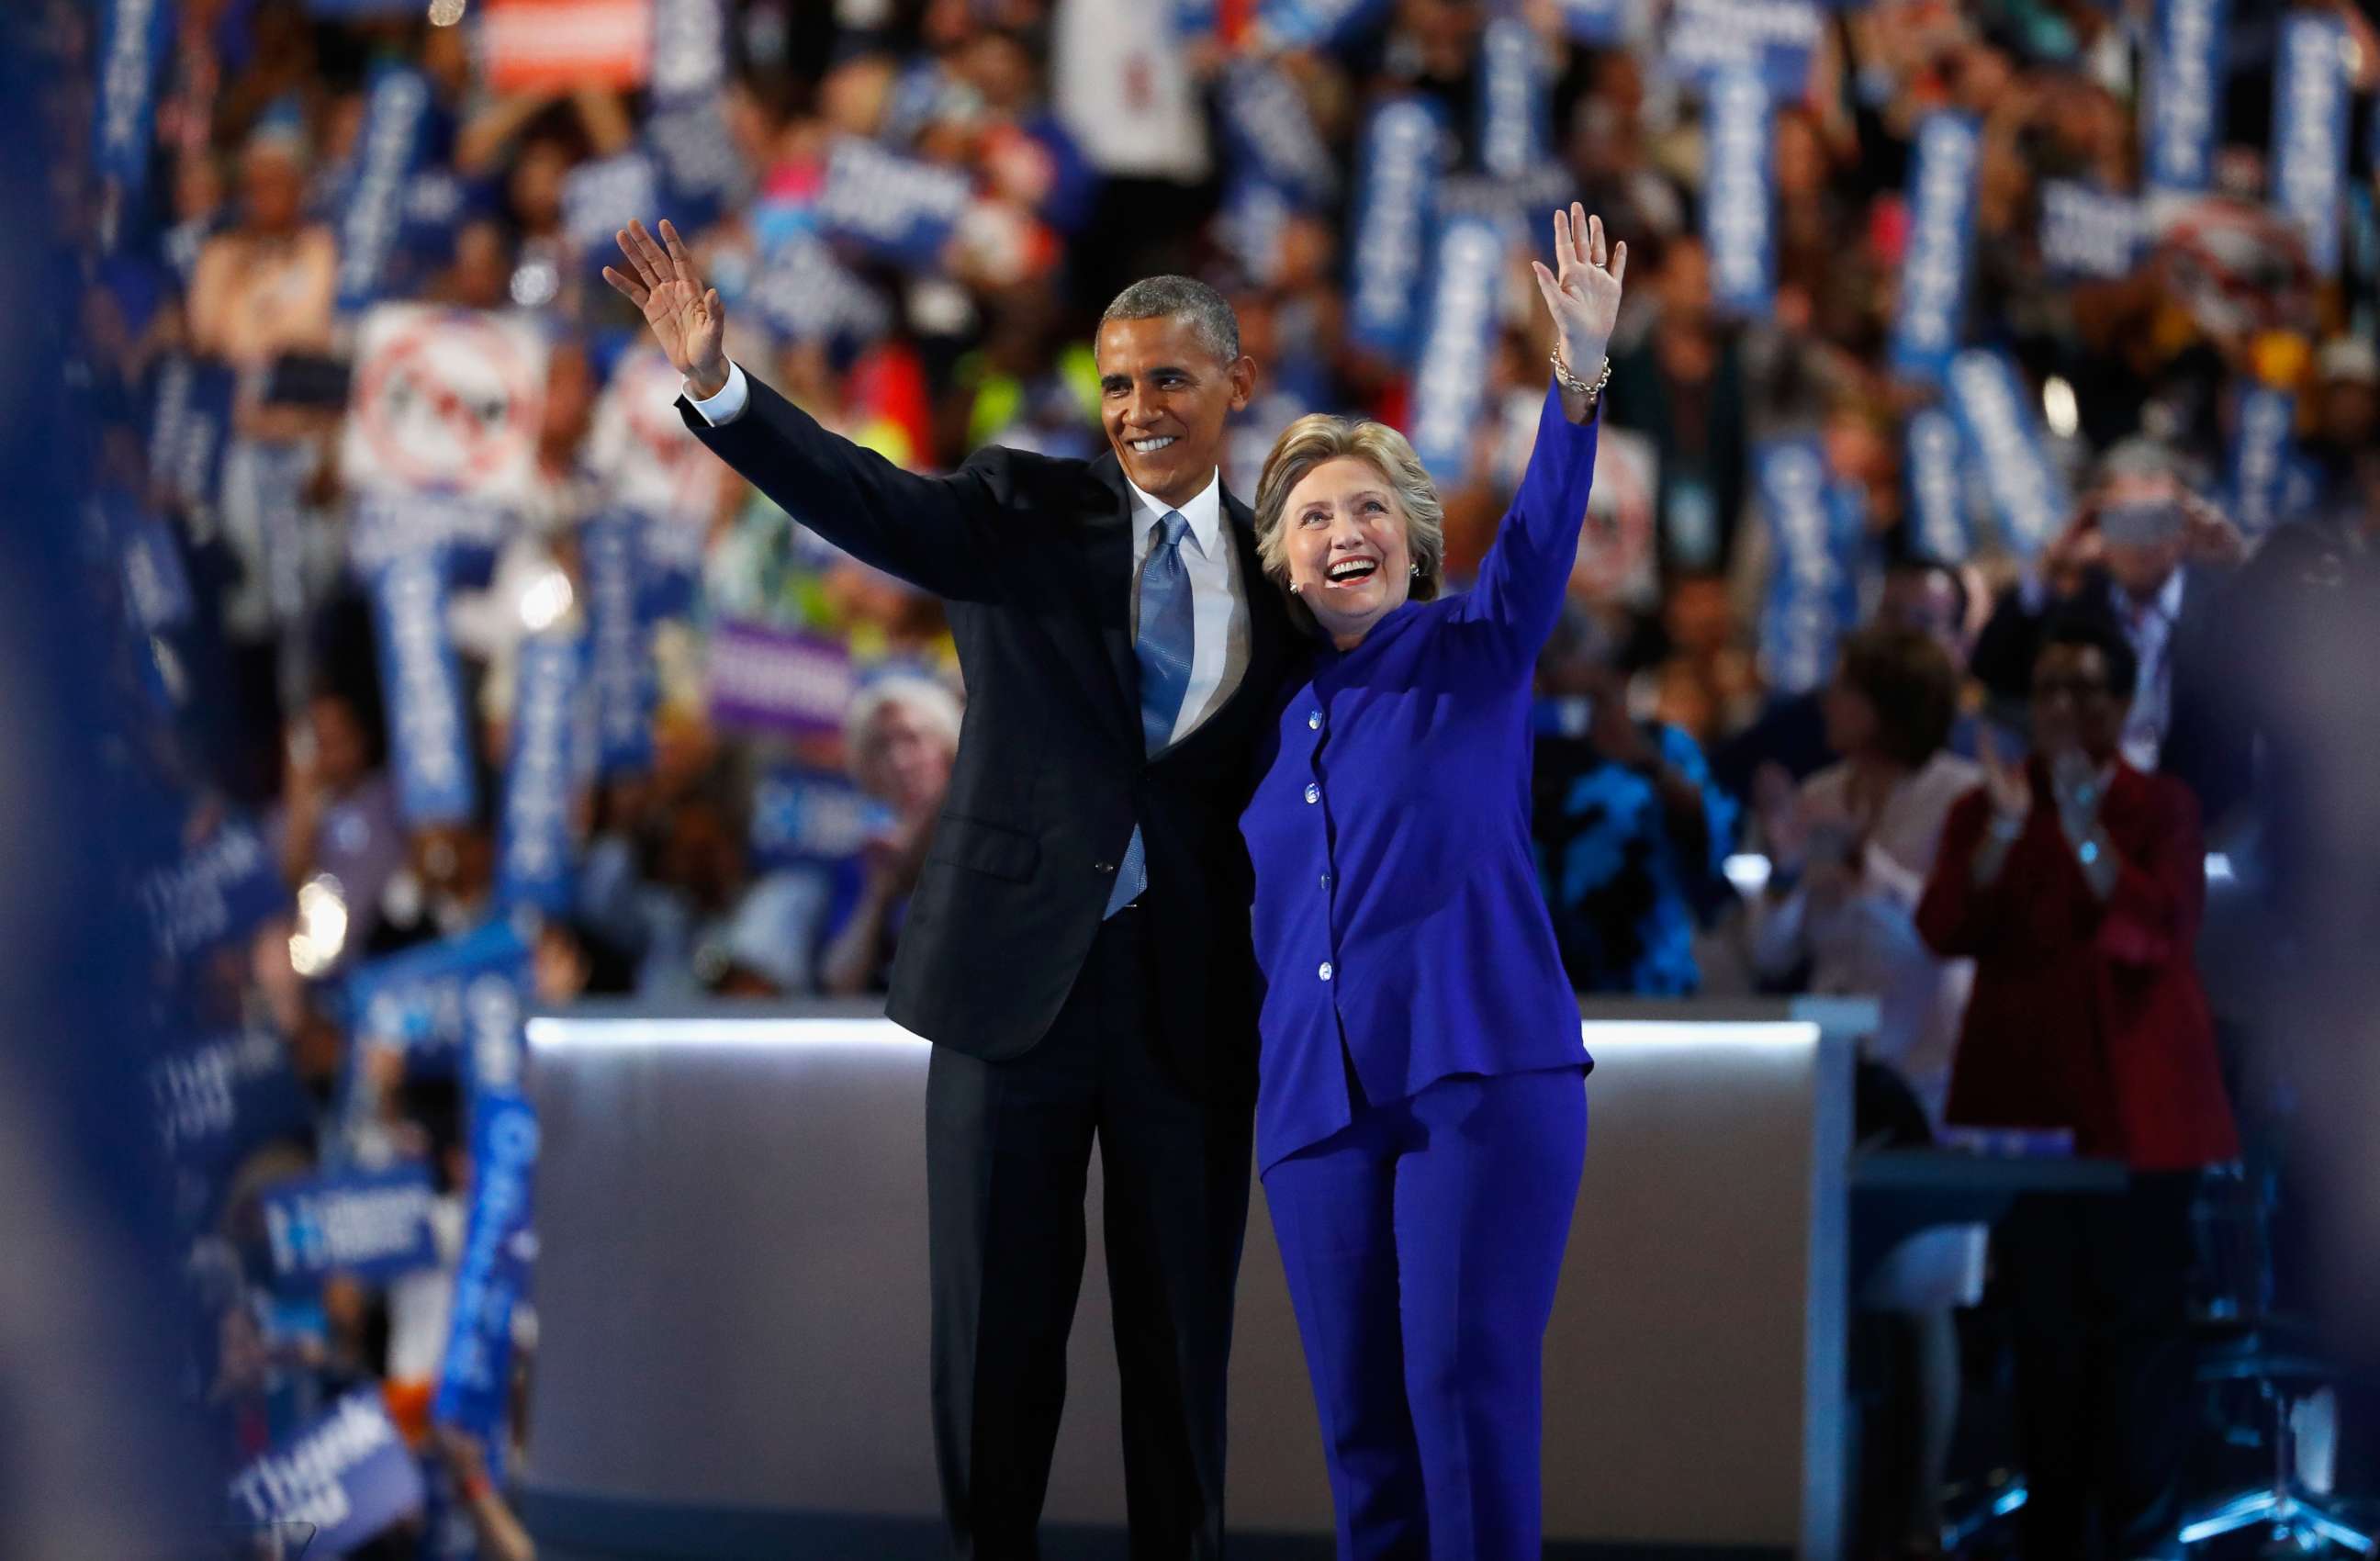 PHOTO: President Barack Obama and Democratic presidential nominee Hillary Clinton acknowledge the crowd on the third day of the Democratic National Convention at the Wells Fargo Center, July 27, 2016 in Philadelphia.